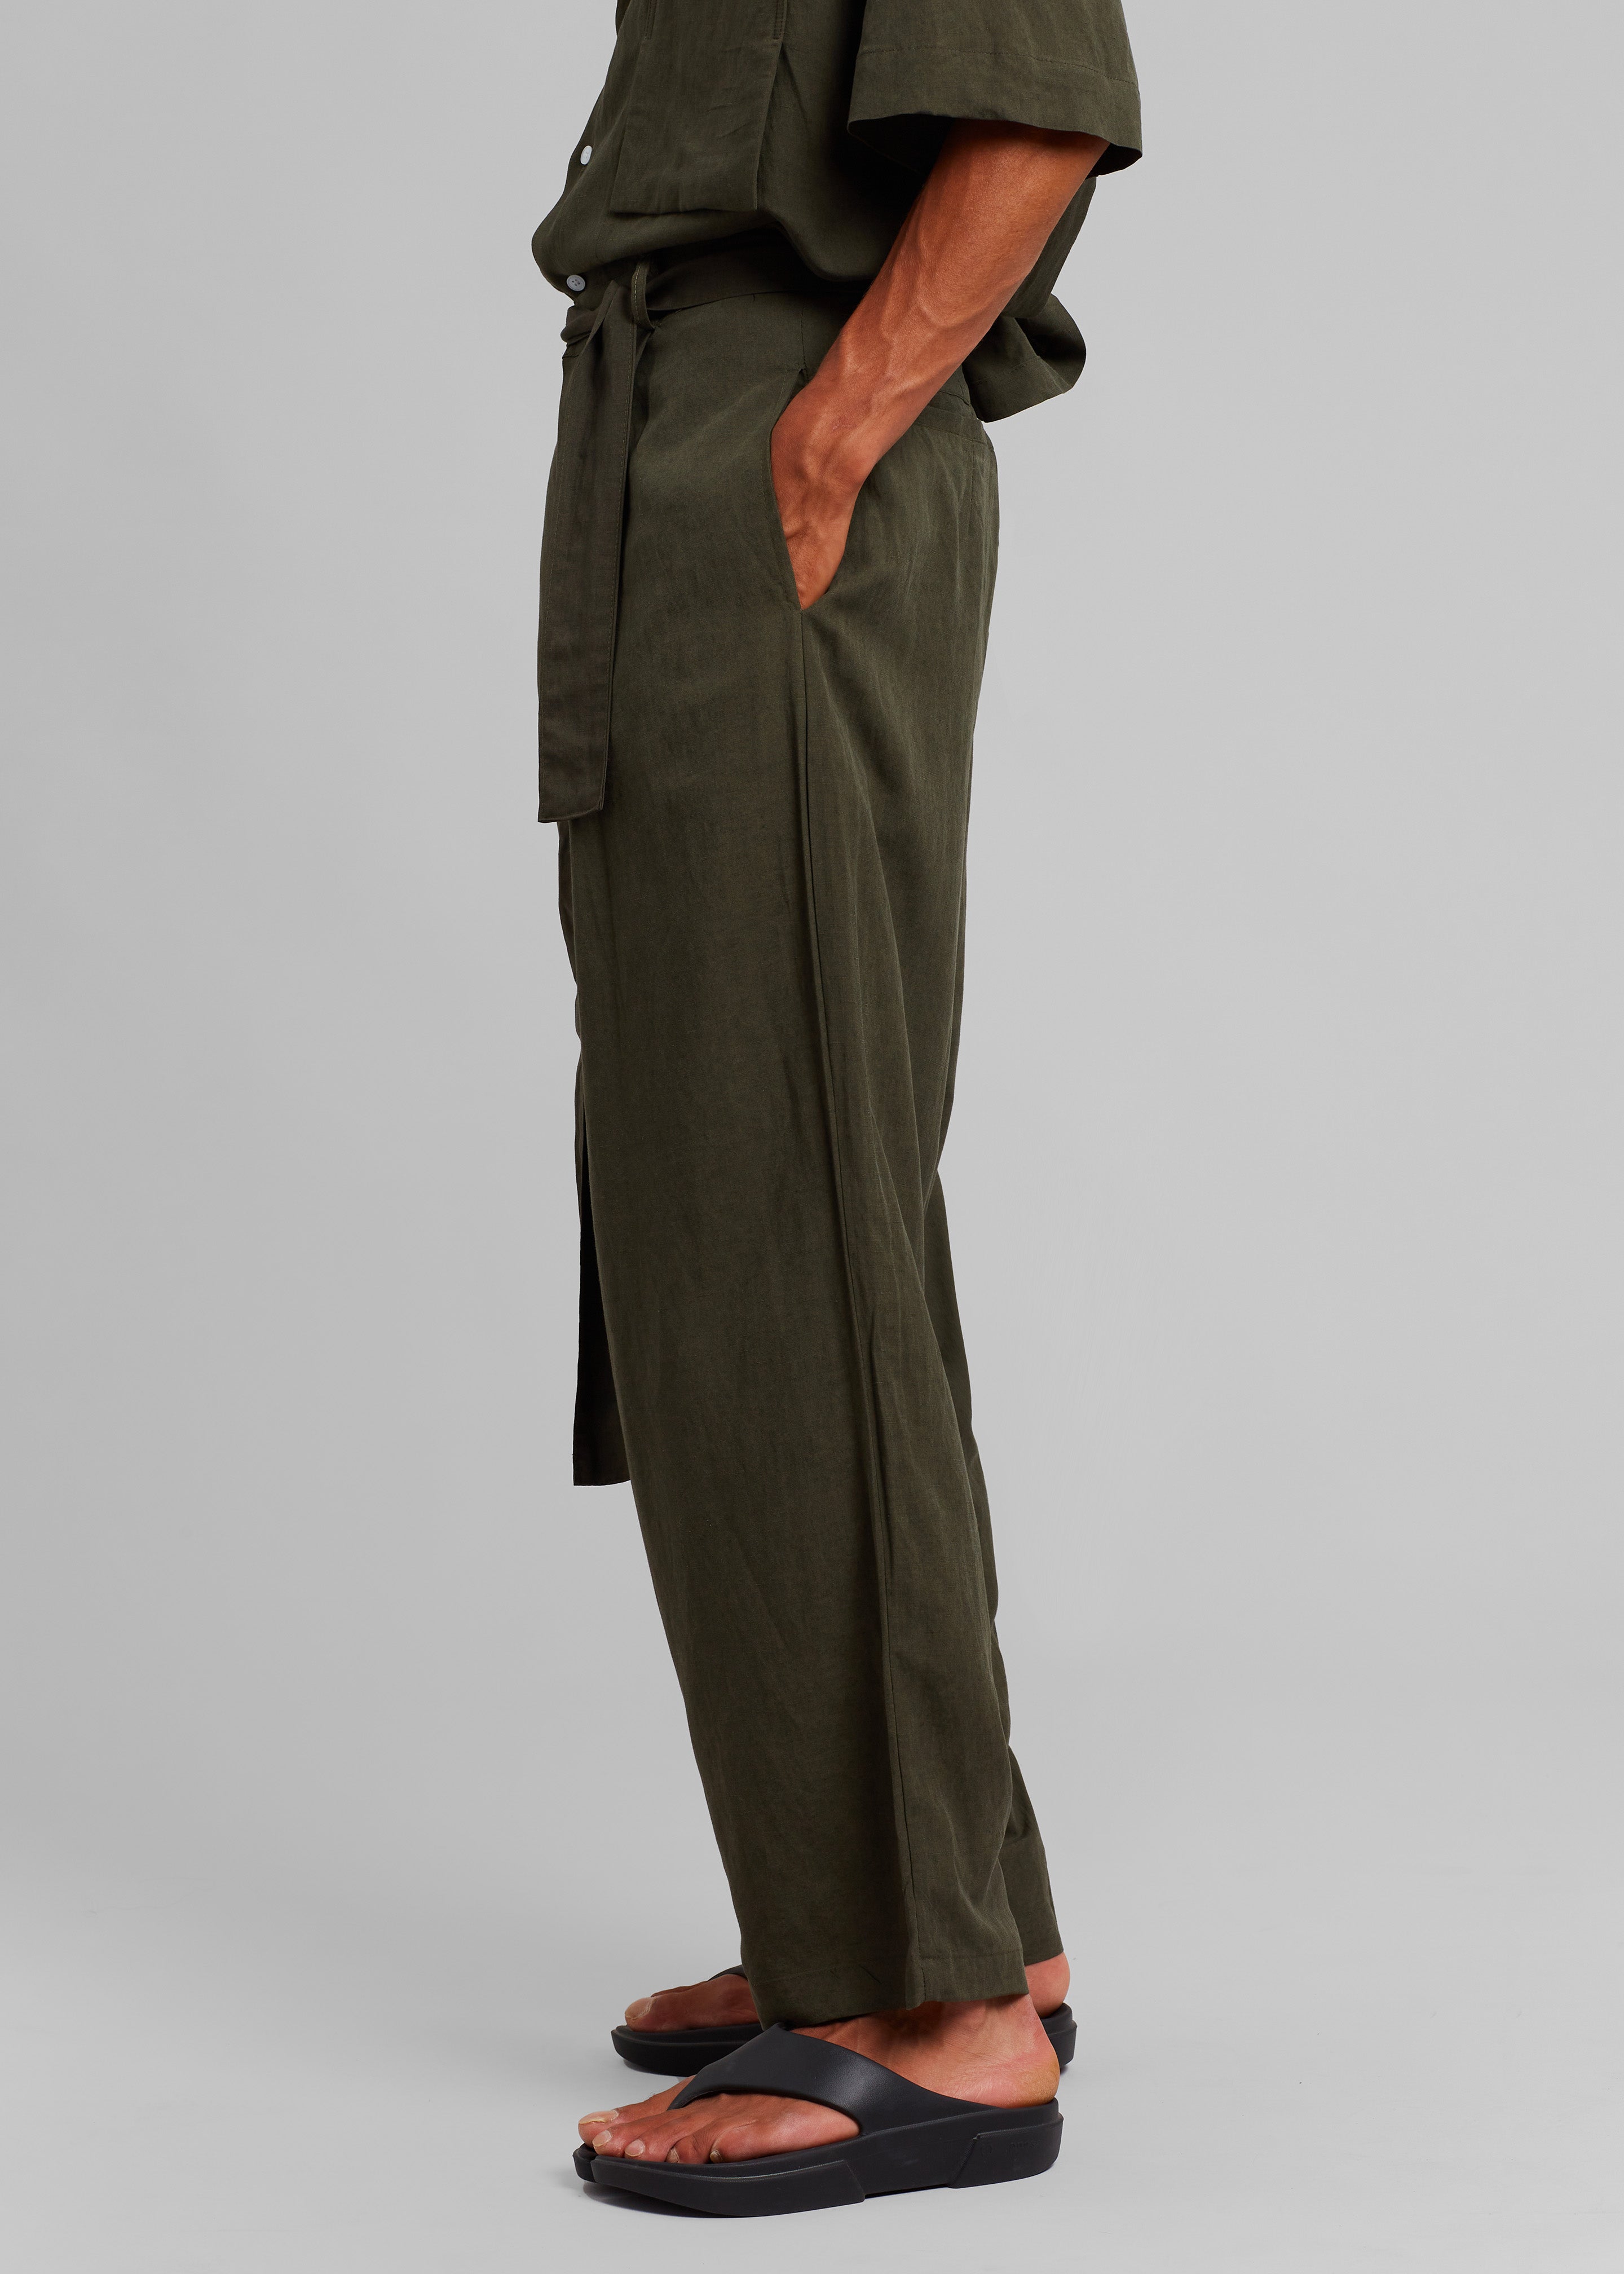 Georg Puch Pants - Olive - 5